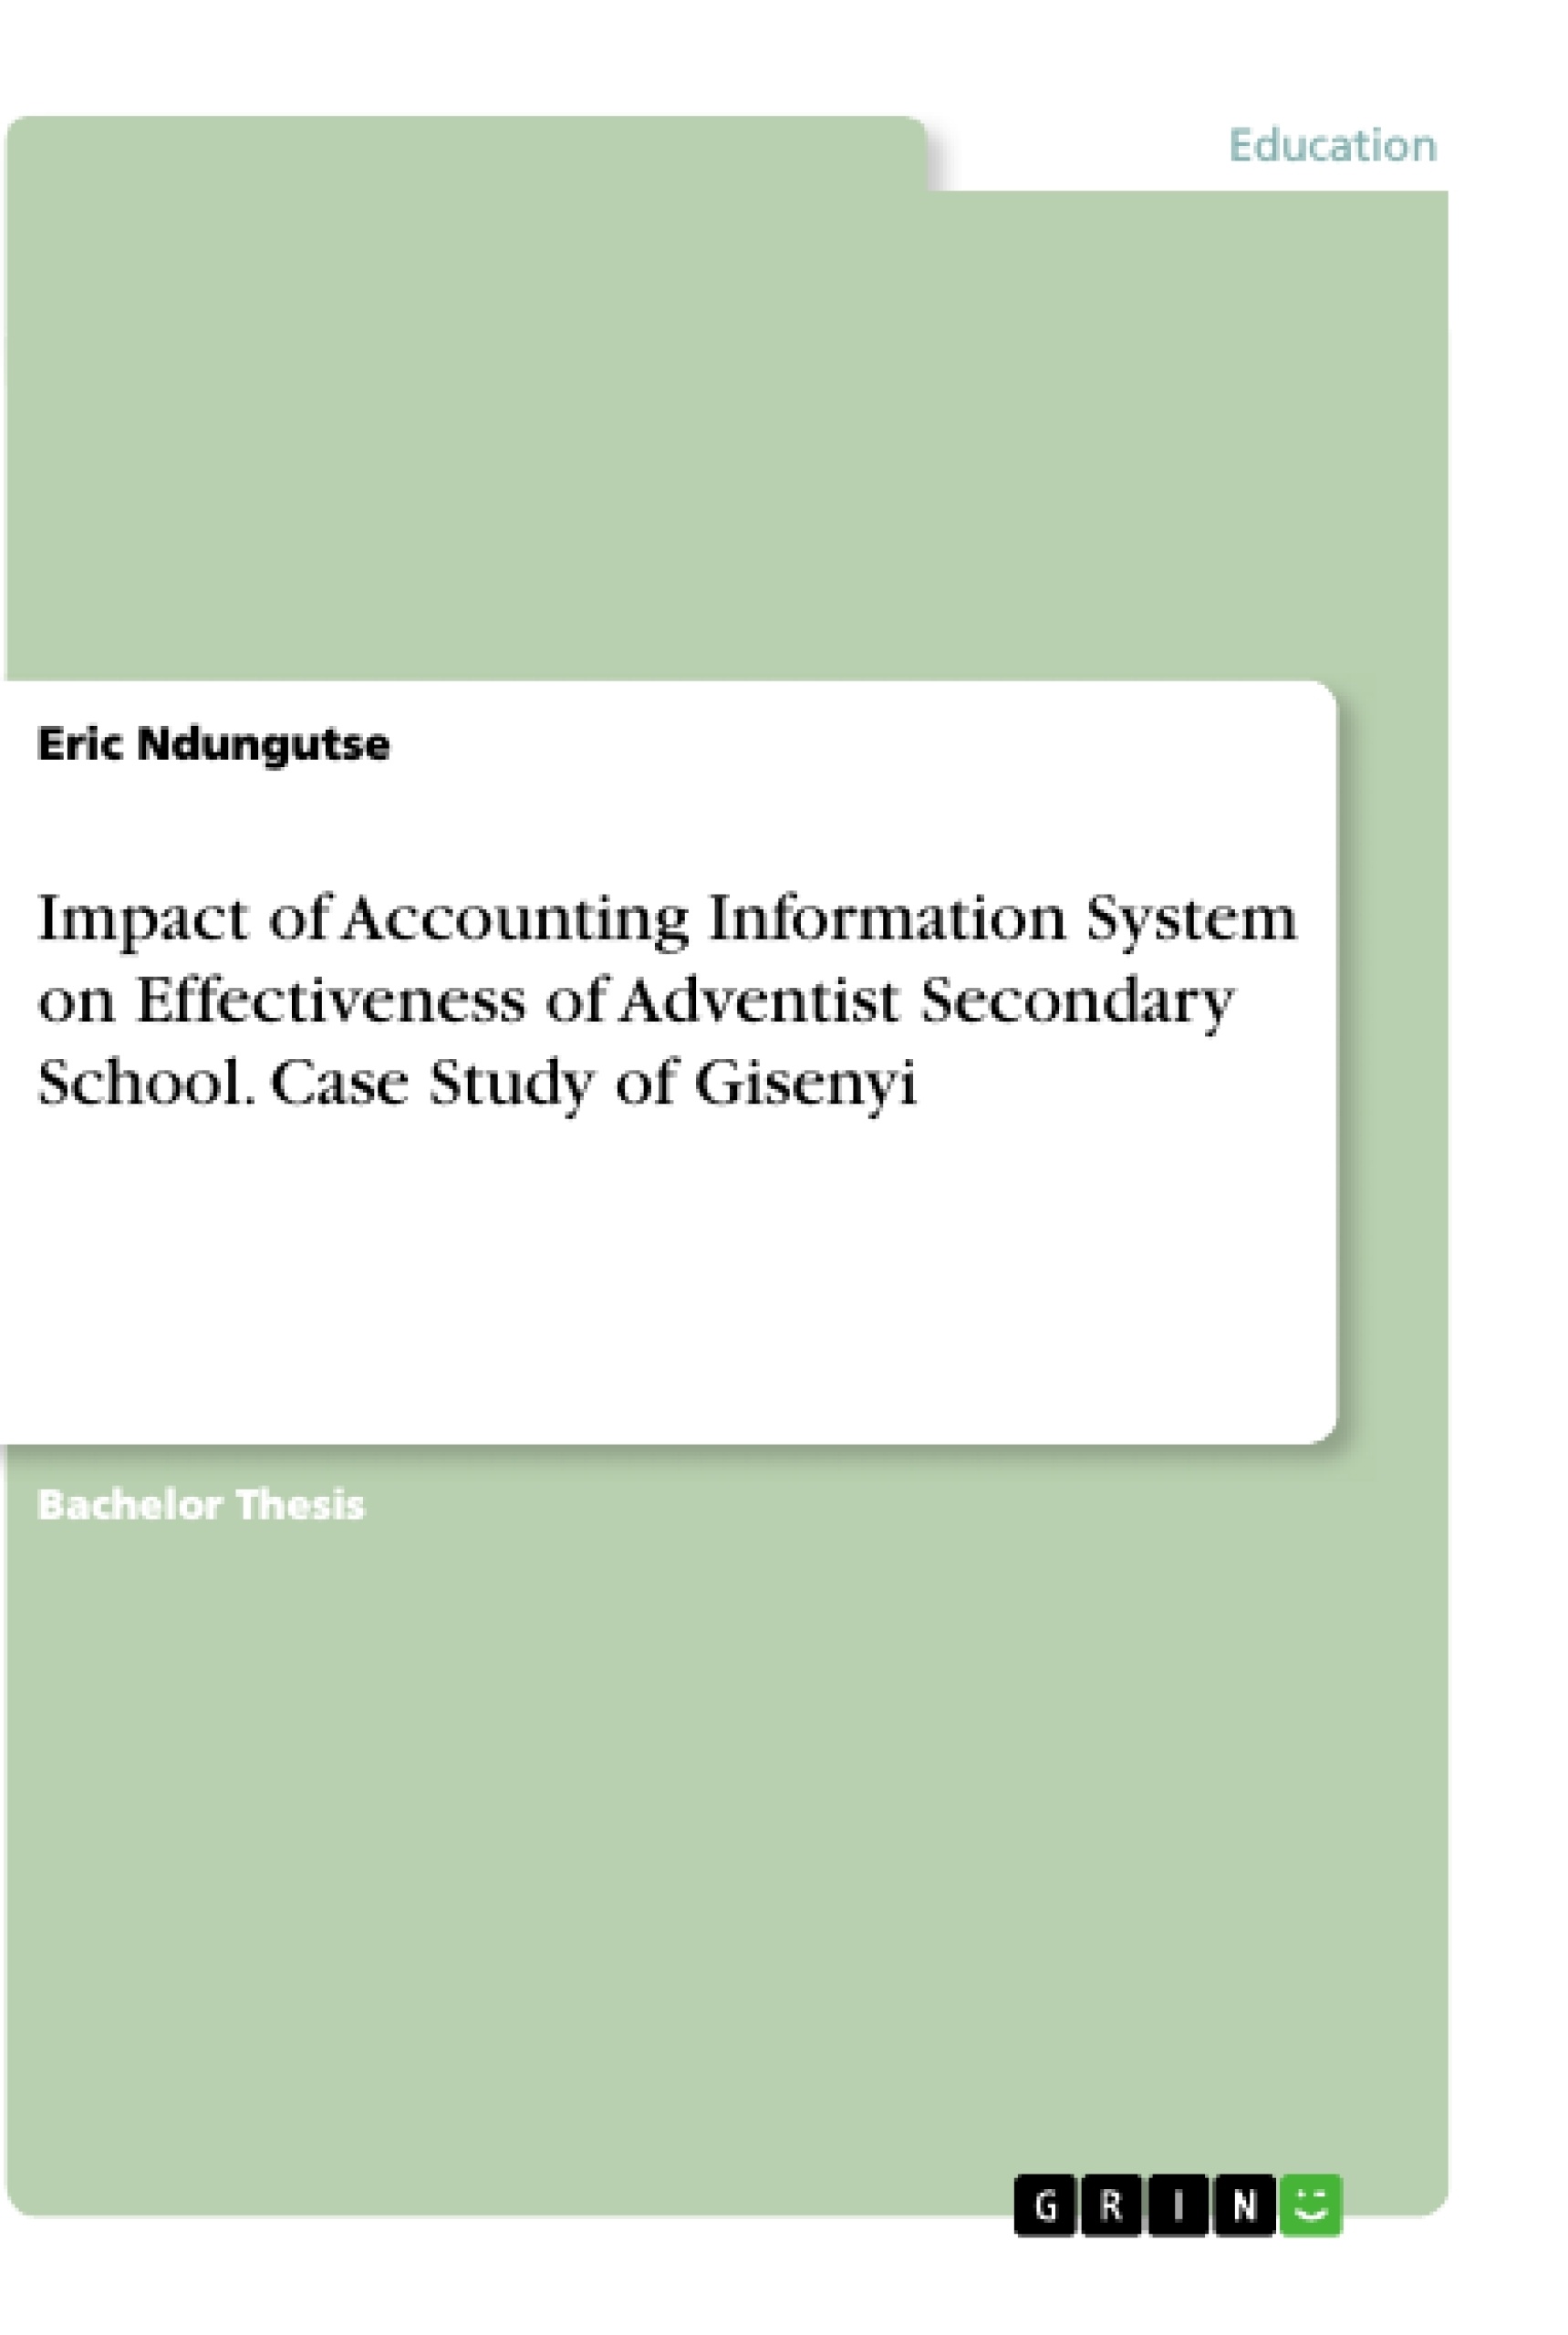 Título: Impact of Accounting Information System on Effectiveness of Adventist Secondary School. Case Study of Gisenyi